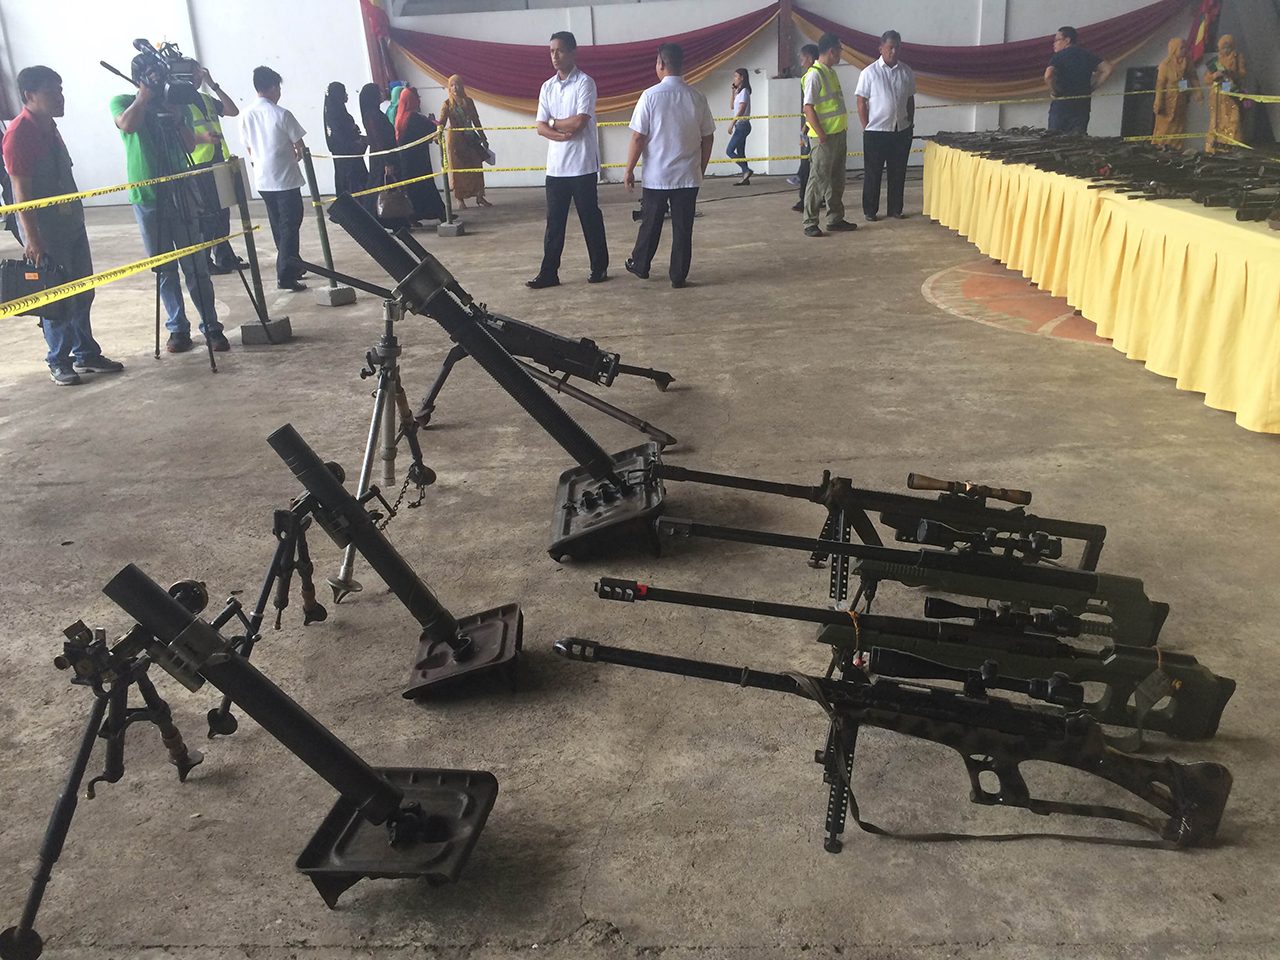 TURNED OVER. Some of the high-powered weapons turned over by the MILF to an independent body on June 16. Photo by Rappler 